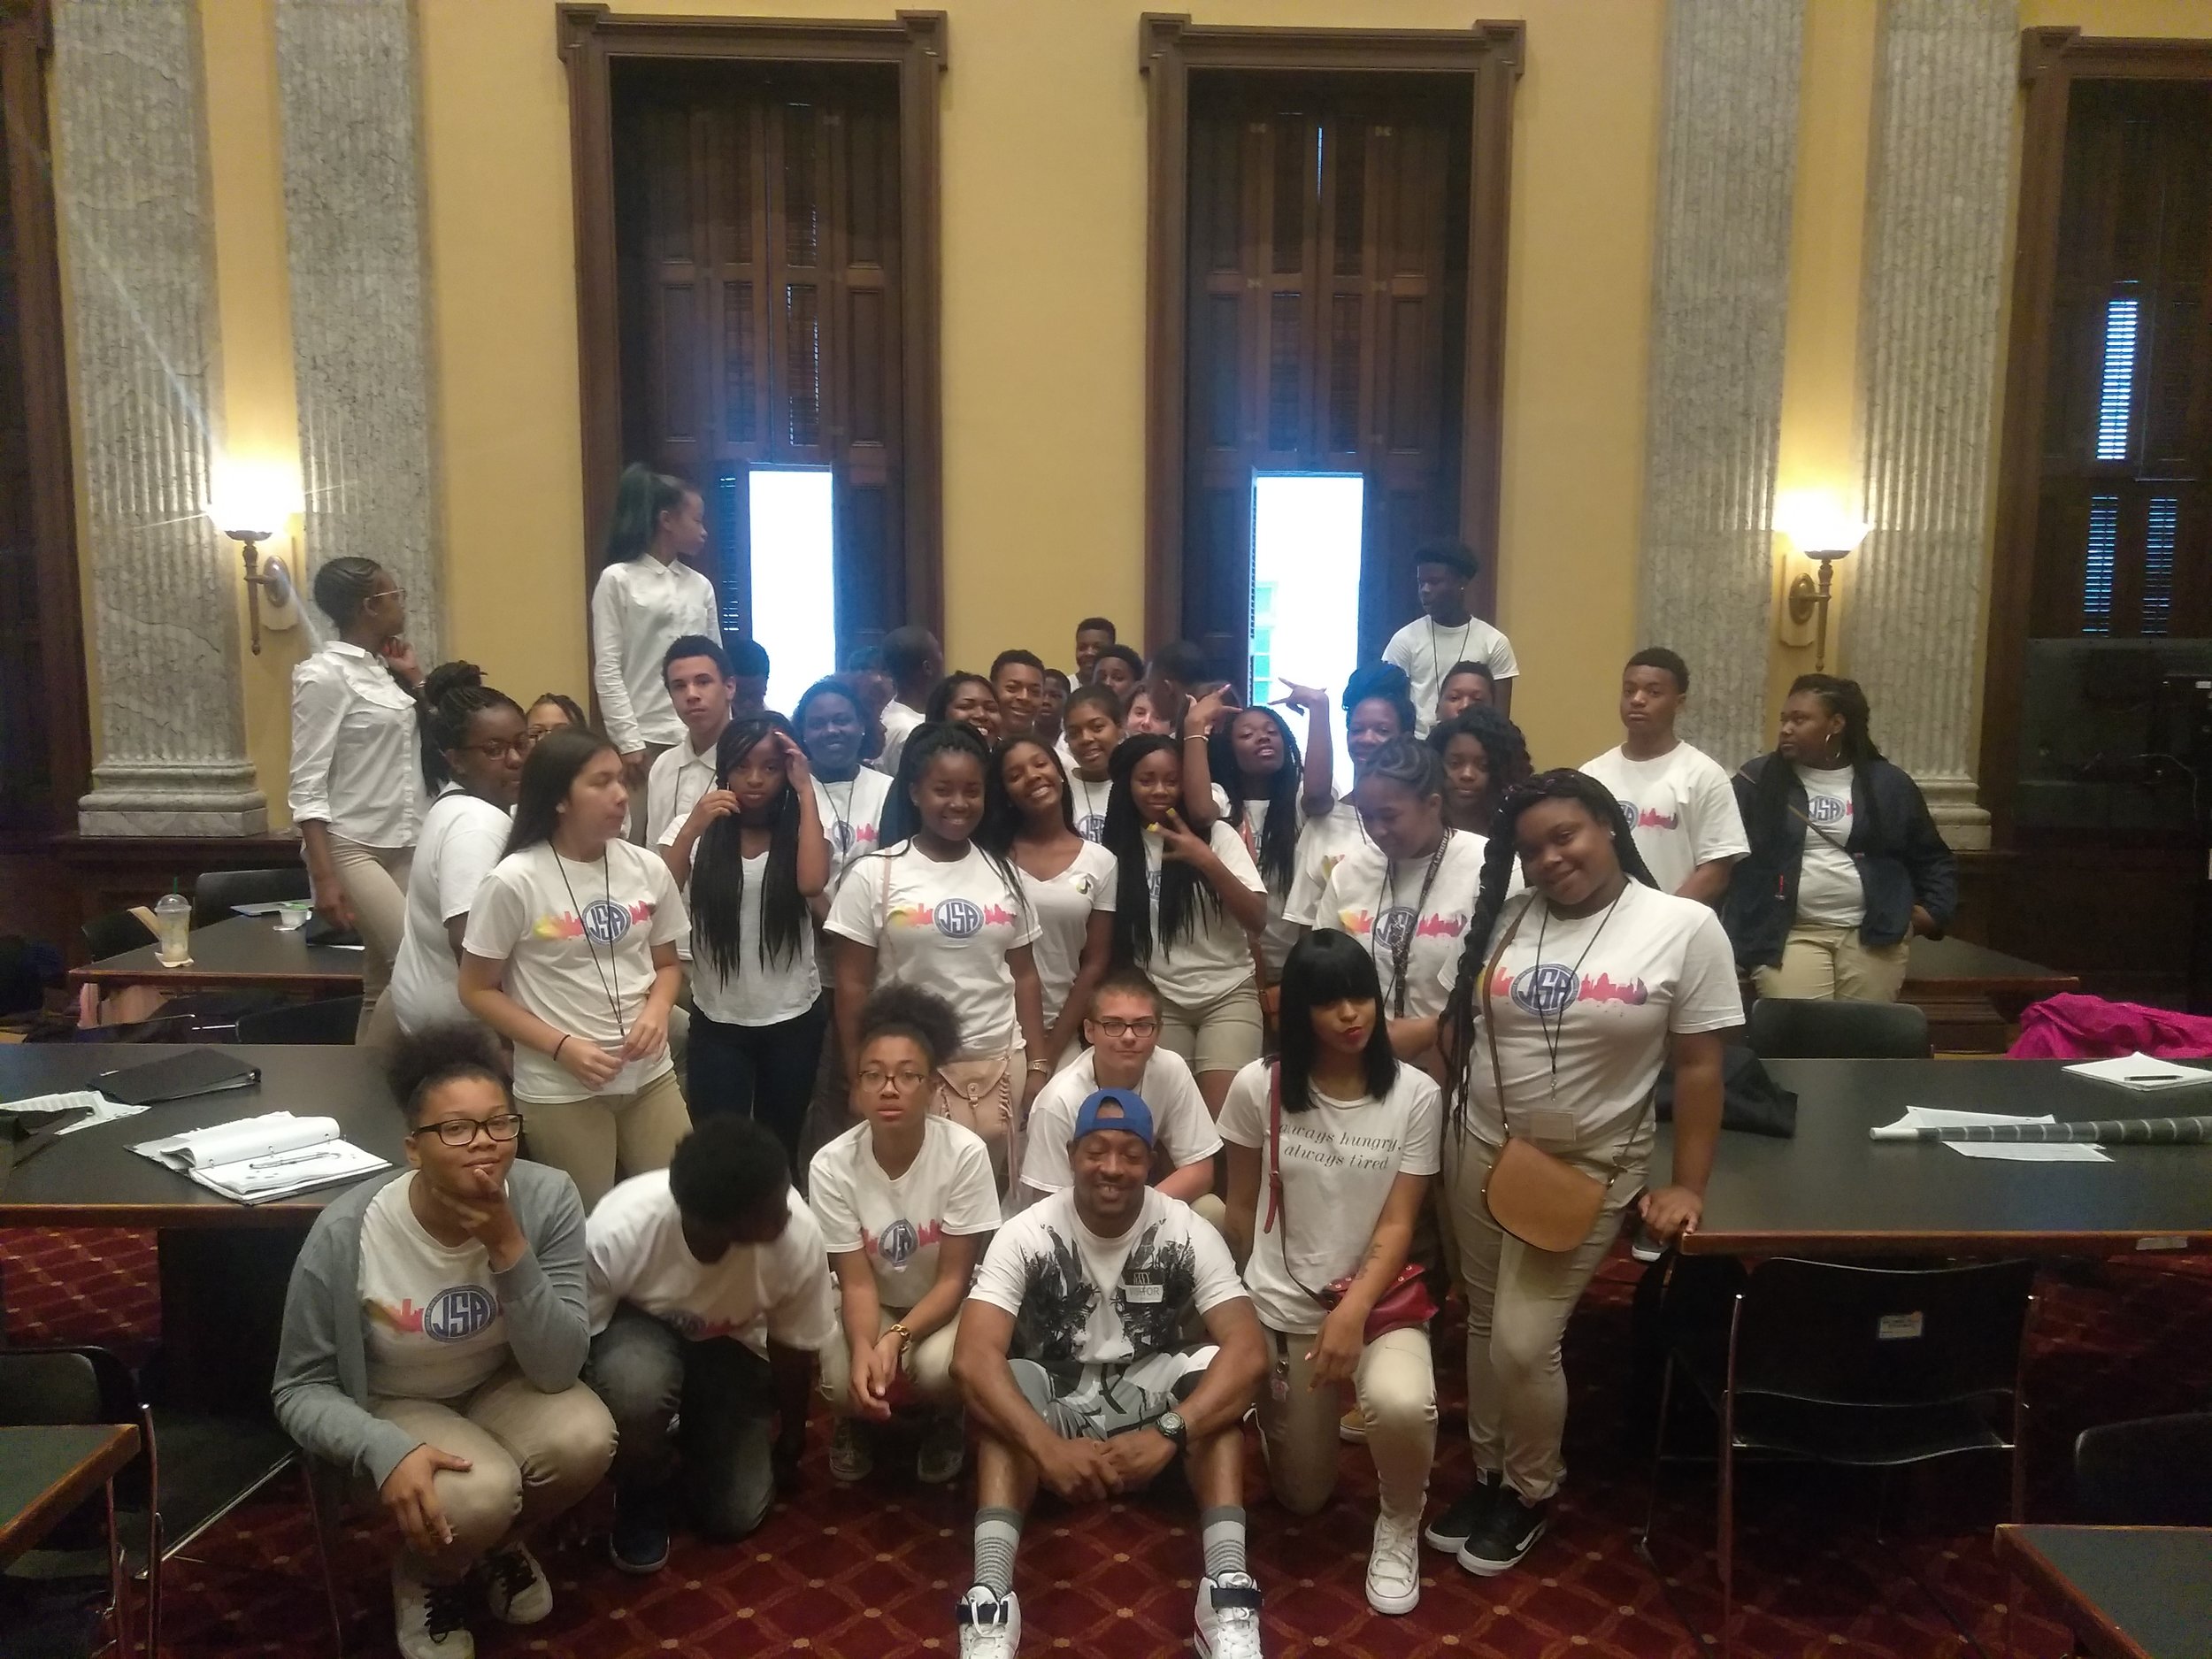  HOPE leader Antoin Quarles with youth from City Hall Urban Community Development to Relieve Barriers 